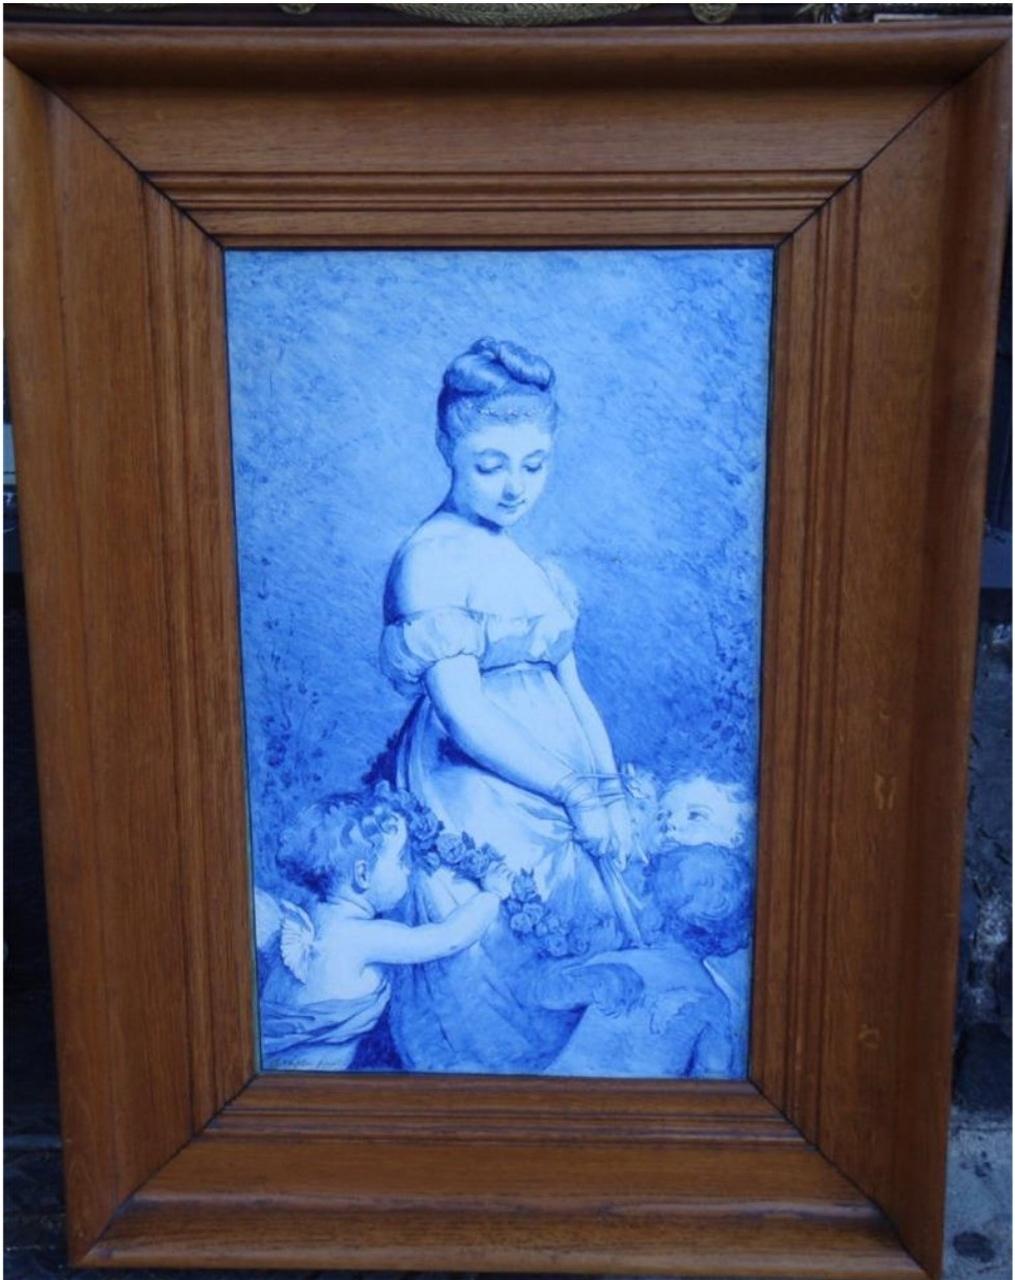 The Following Item we are offering is a Beautiful Museum Quality Painting on Porcelain of a Woman surrounded by Cherubs holding Garland. Magnificently done with Outstanding Detail. Framed in a Beautiful Wooden Frame, inscribed Ch. Chaplin. Taken out